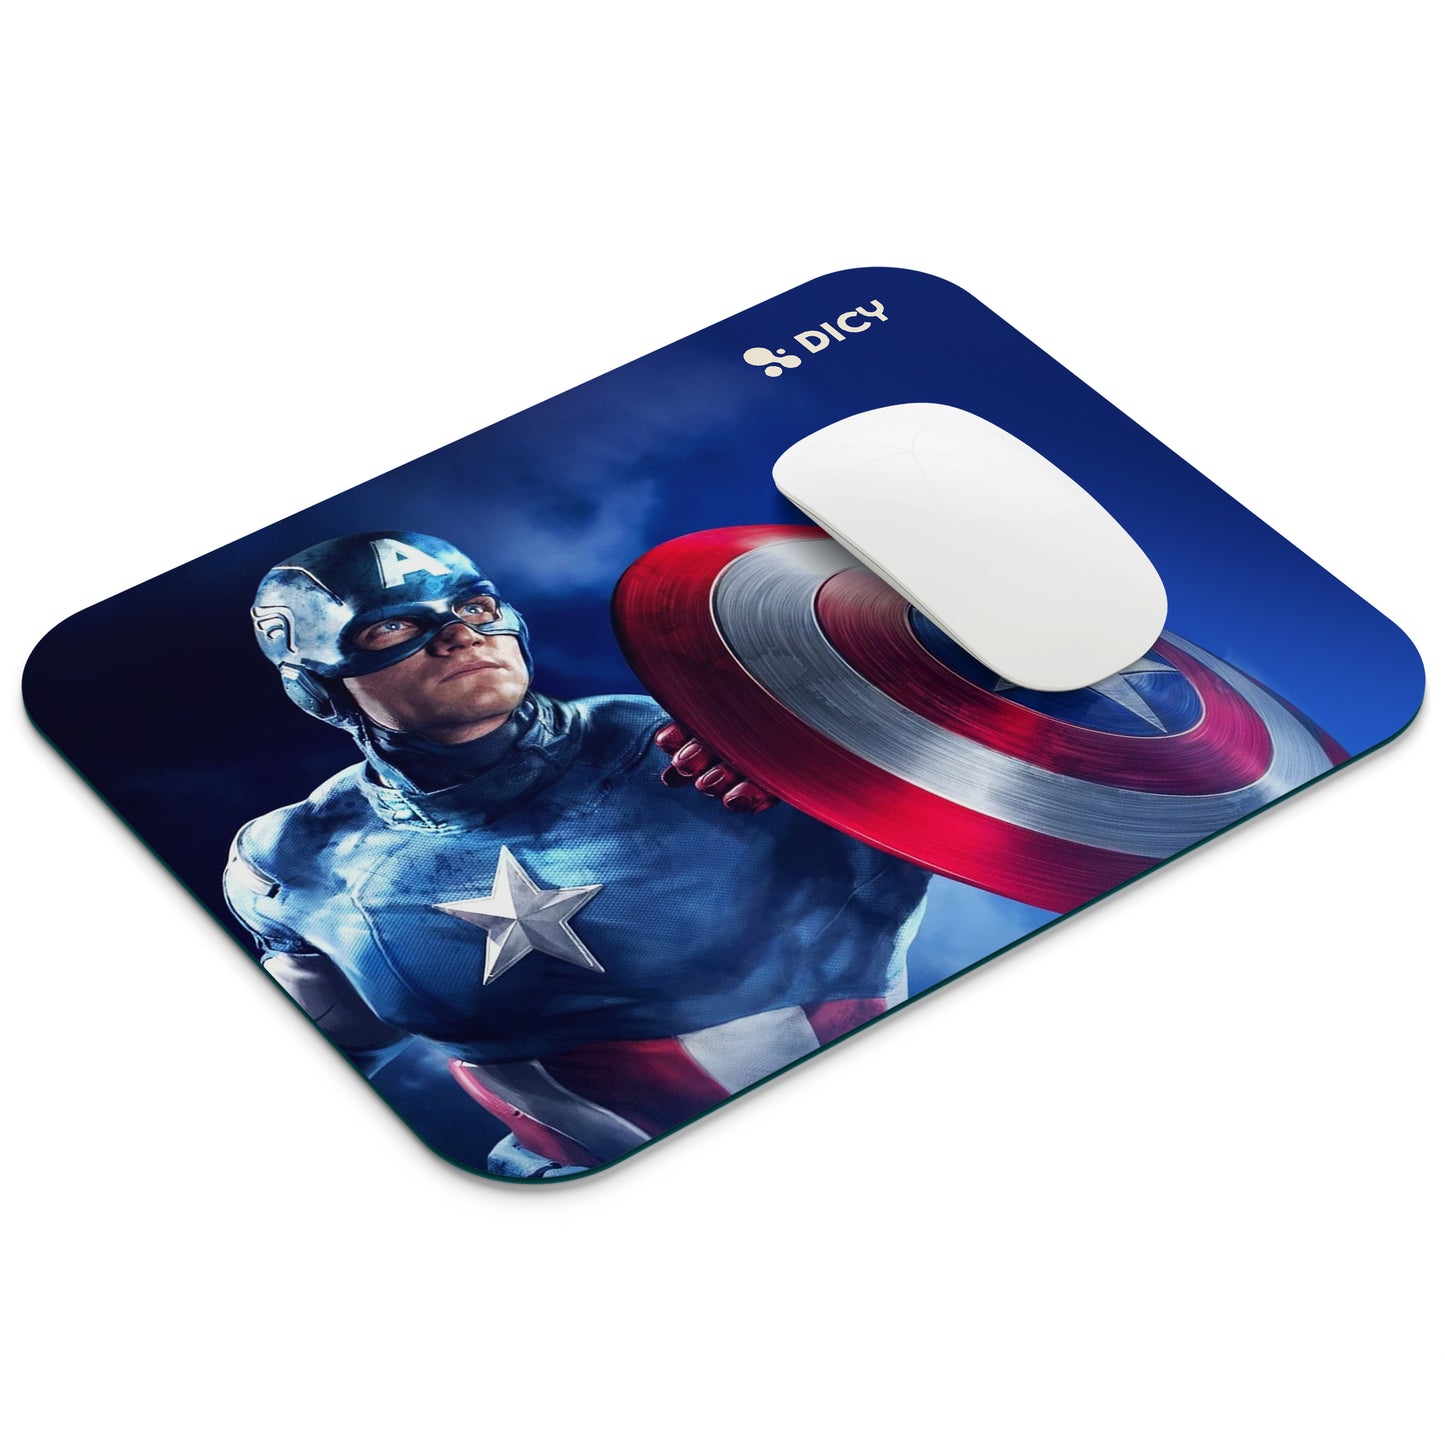 Mouse pad for Office Laptop/PC | Captain America